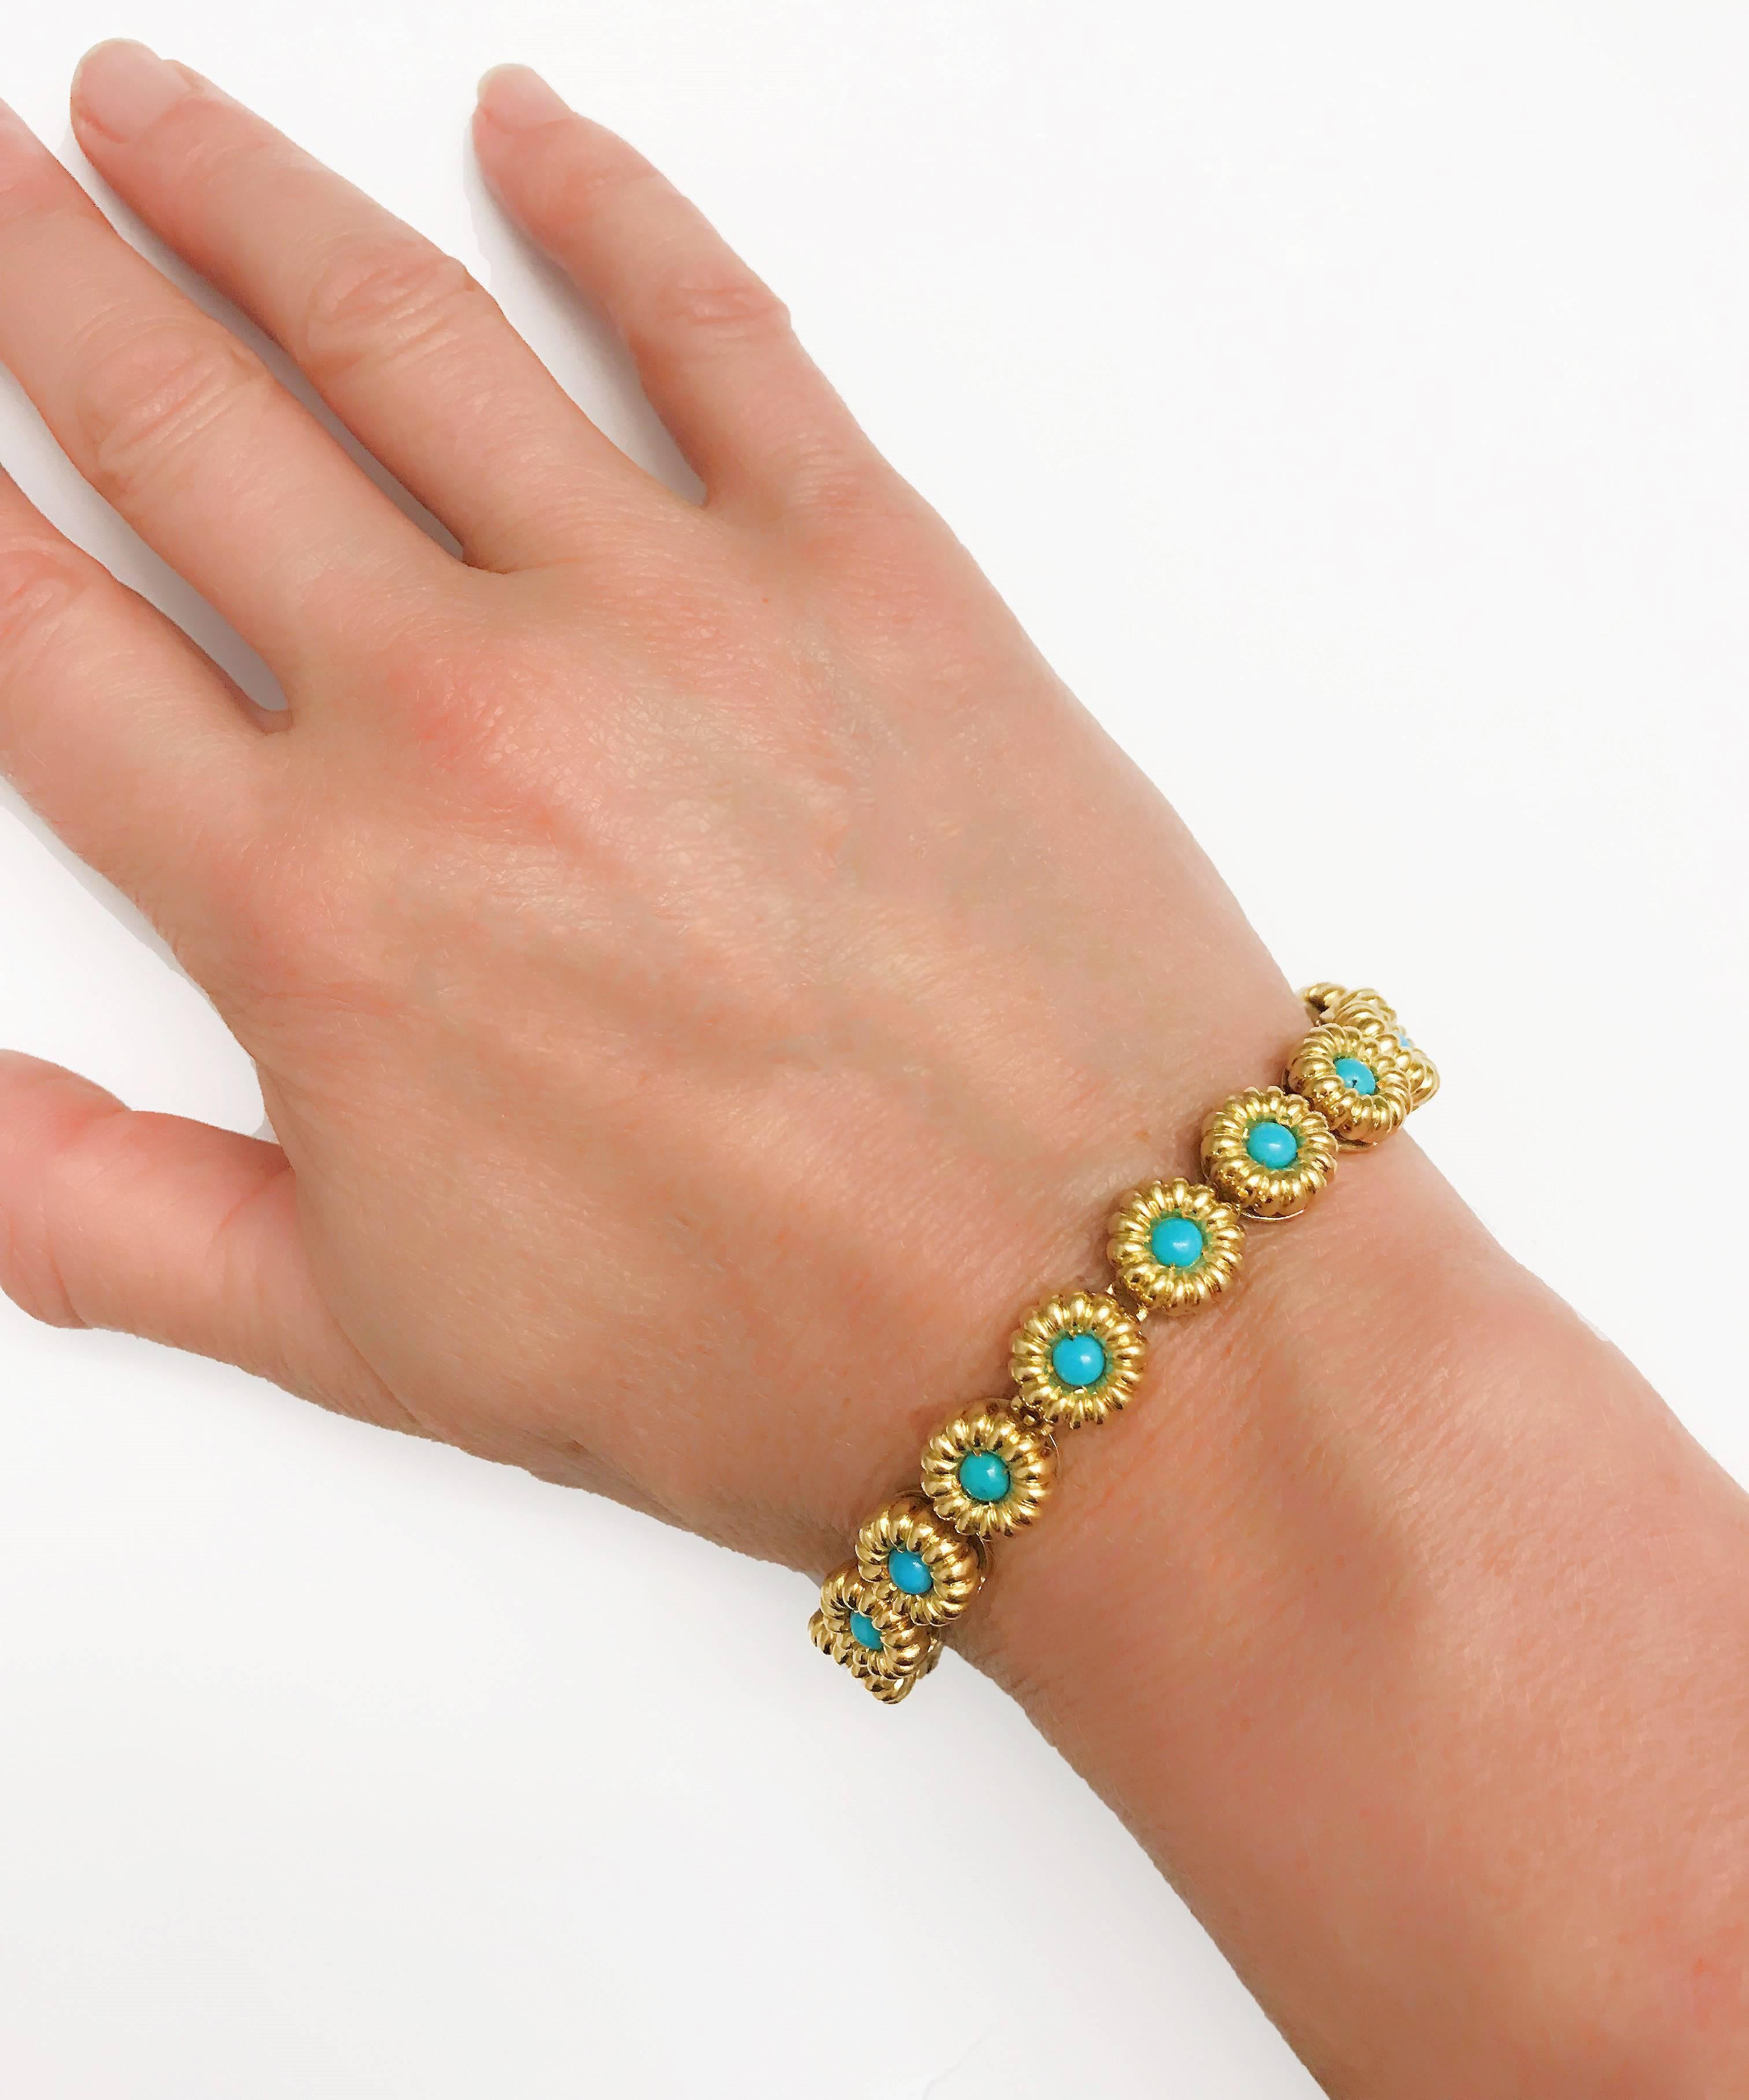 18 Karat Yellow Gold Turquoise Bracelets or Choker Necklace For Sale 12